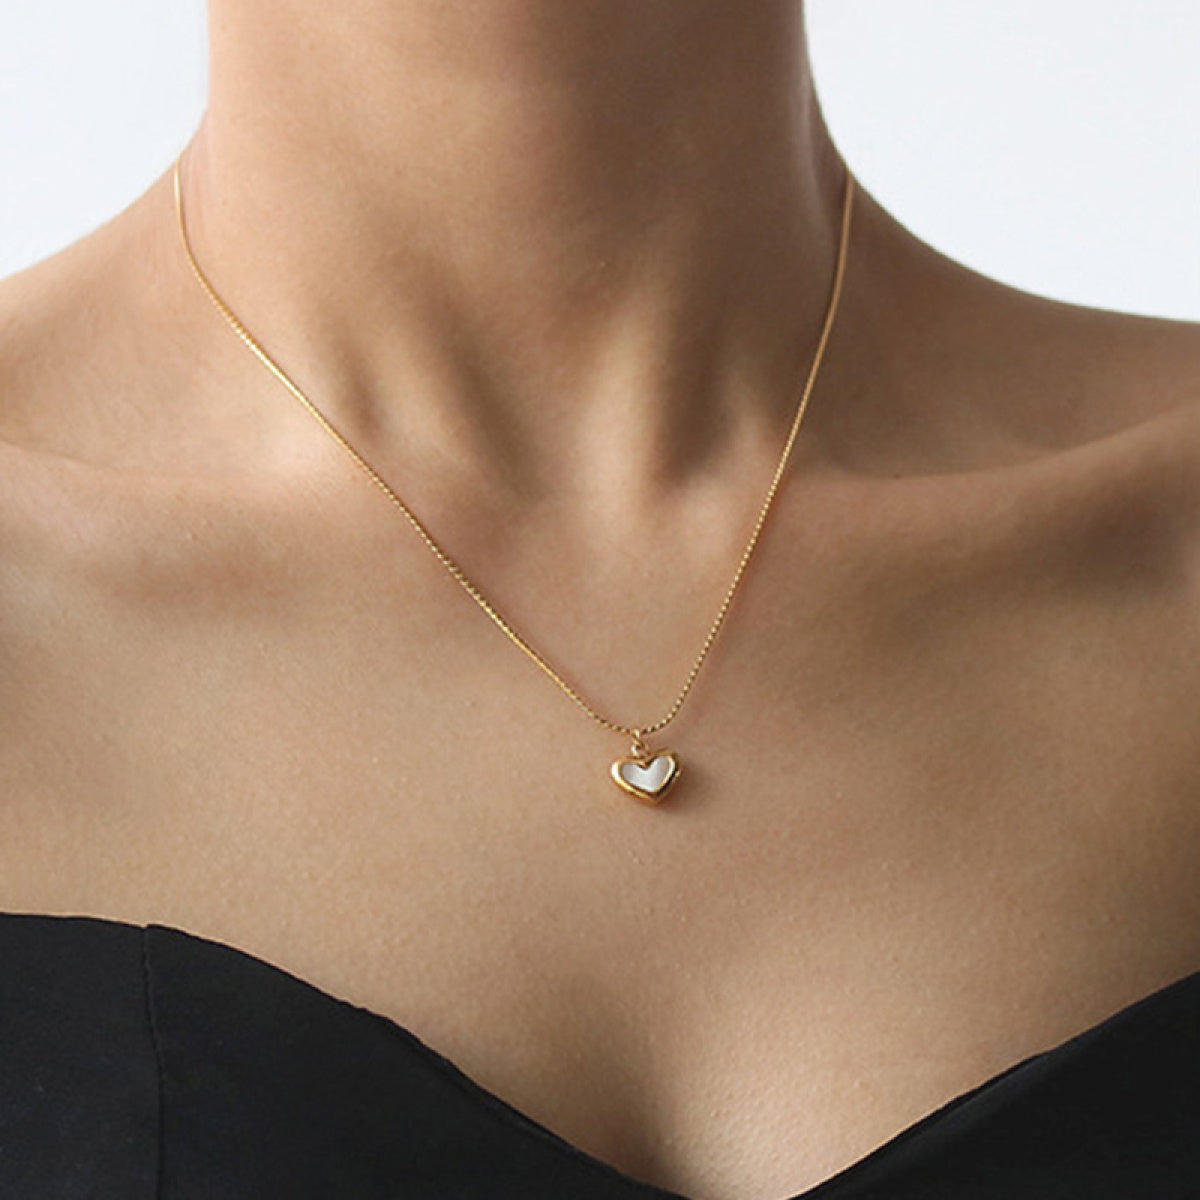 Heart-Shaped With Shell Clavicle Charm Necklace